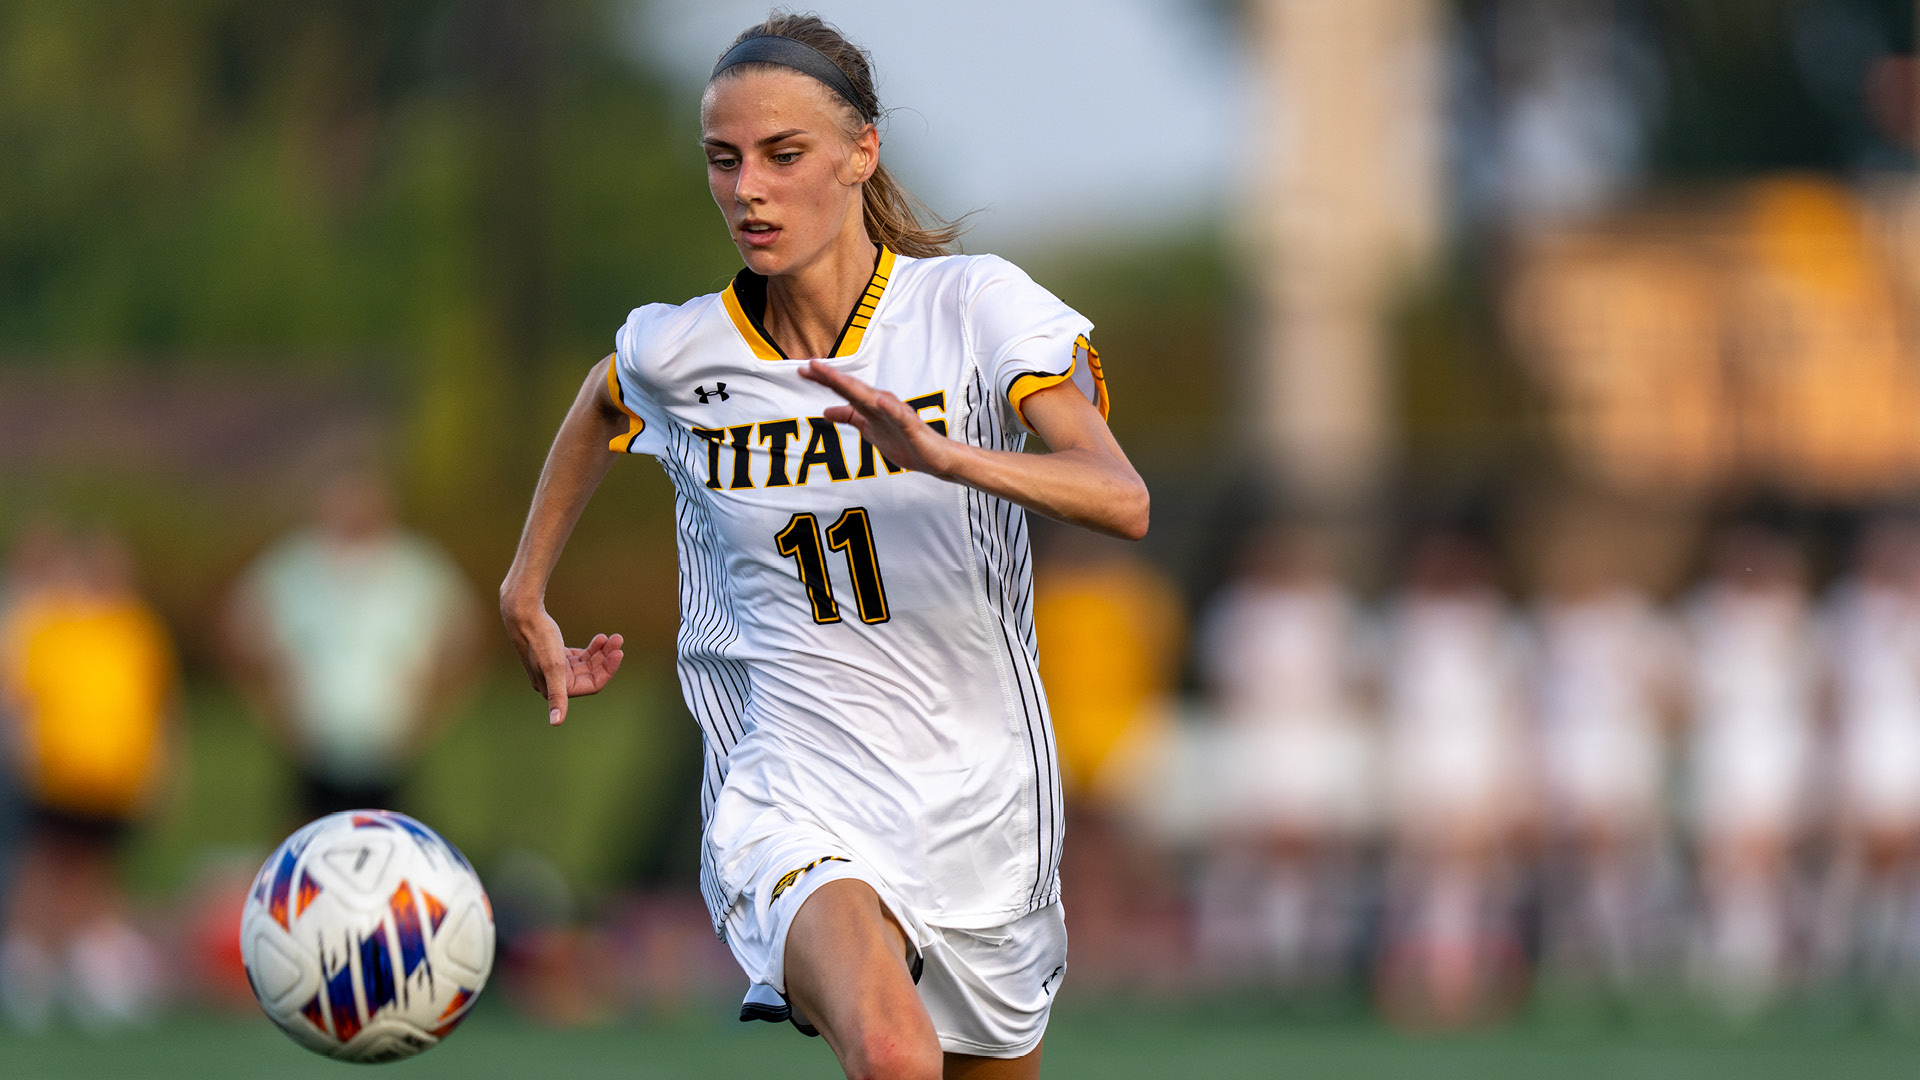 Molly Jackson scored the lone goal for UWO on a penalty kick